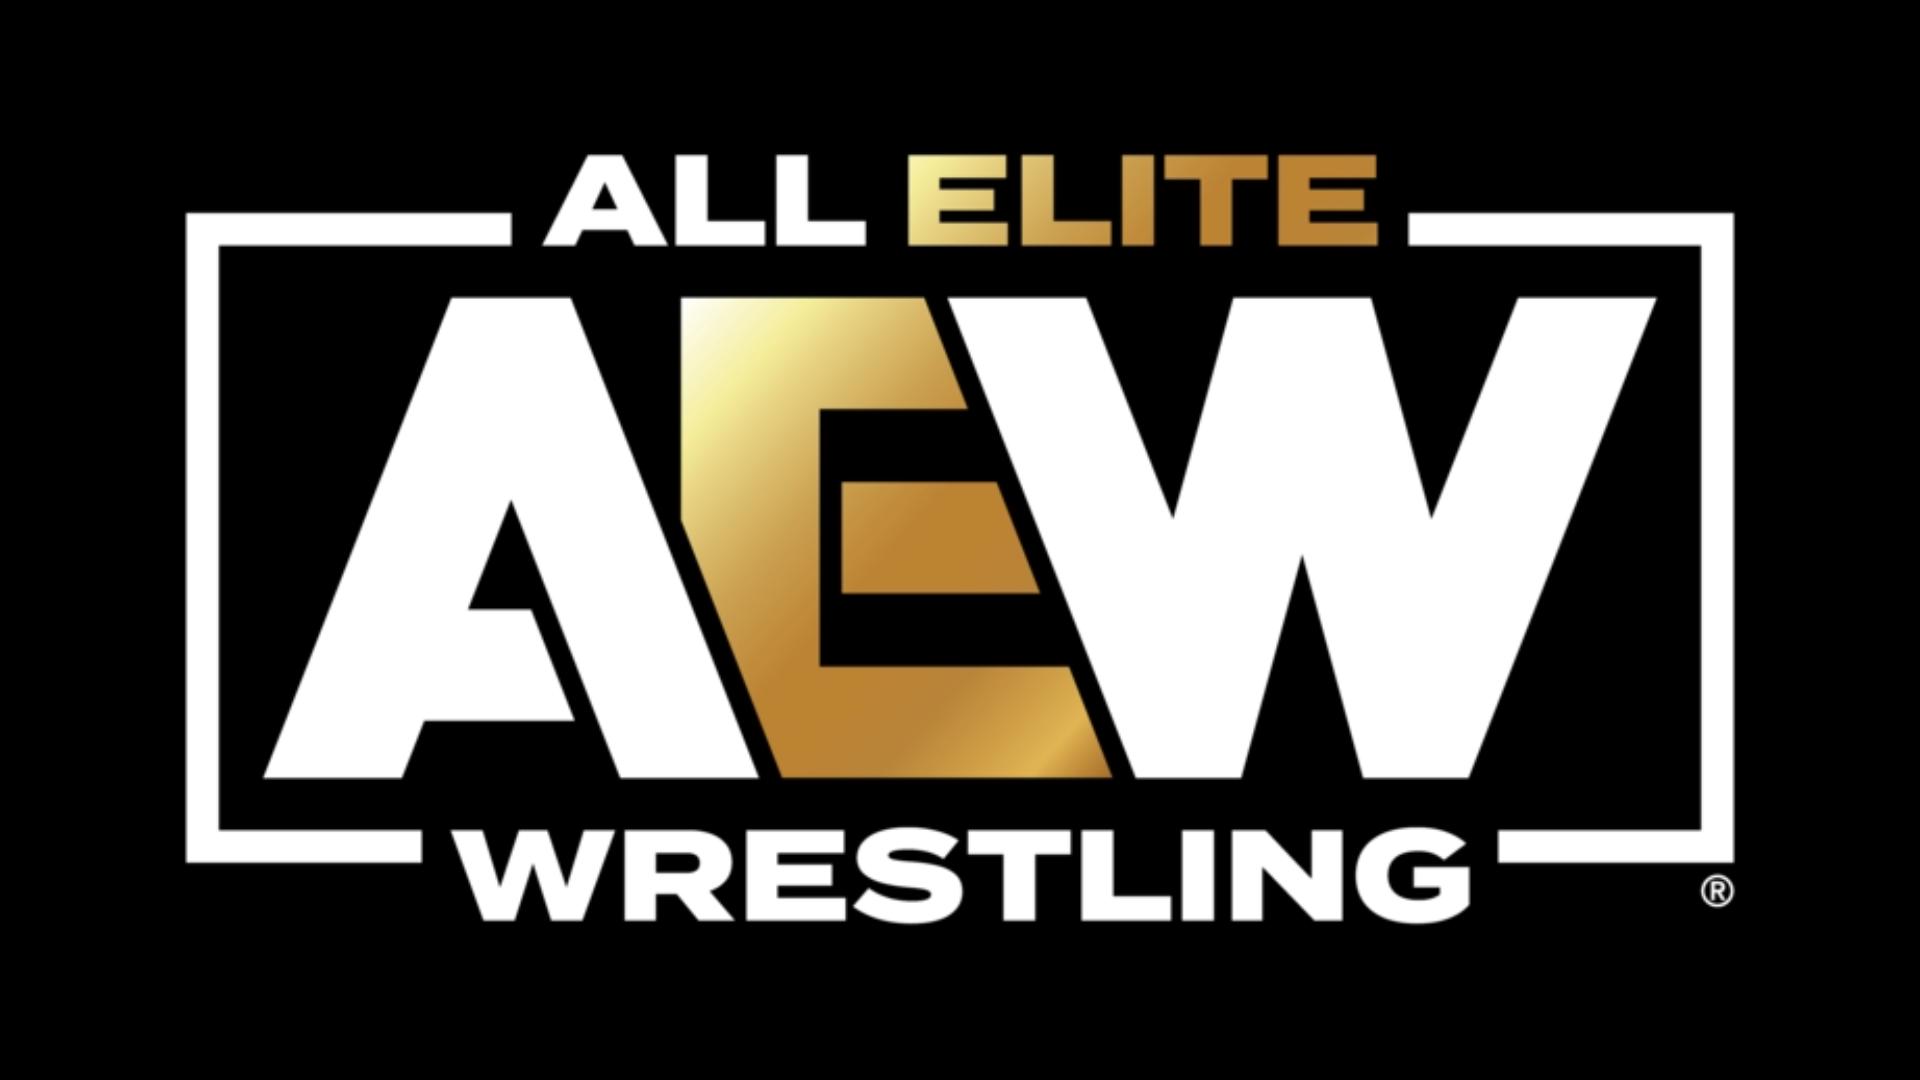 AEW Dynamite is happening at Wells Fargo Arena on Wednesday night.